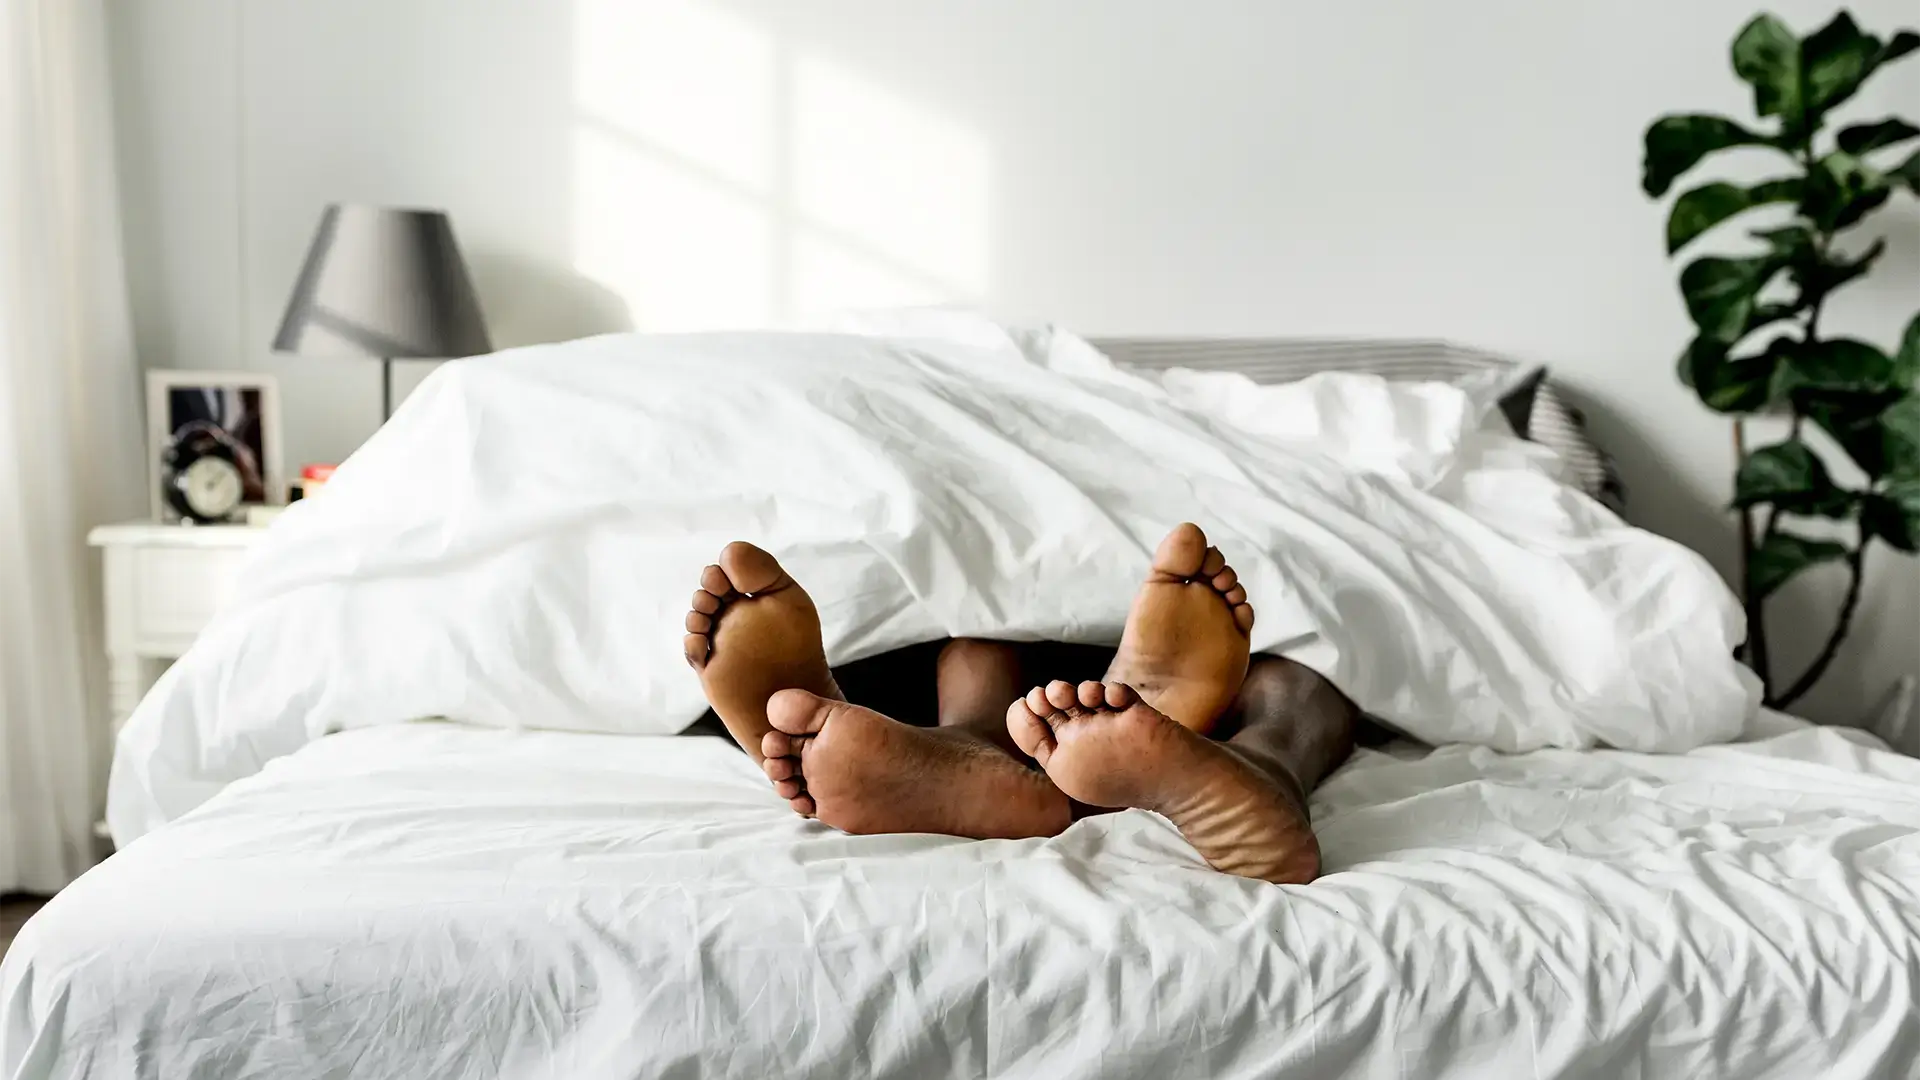 Two pairs of feet poking out under a duvet covering two people